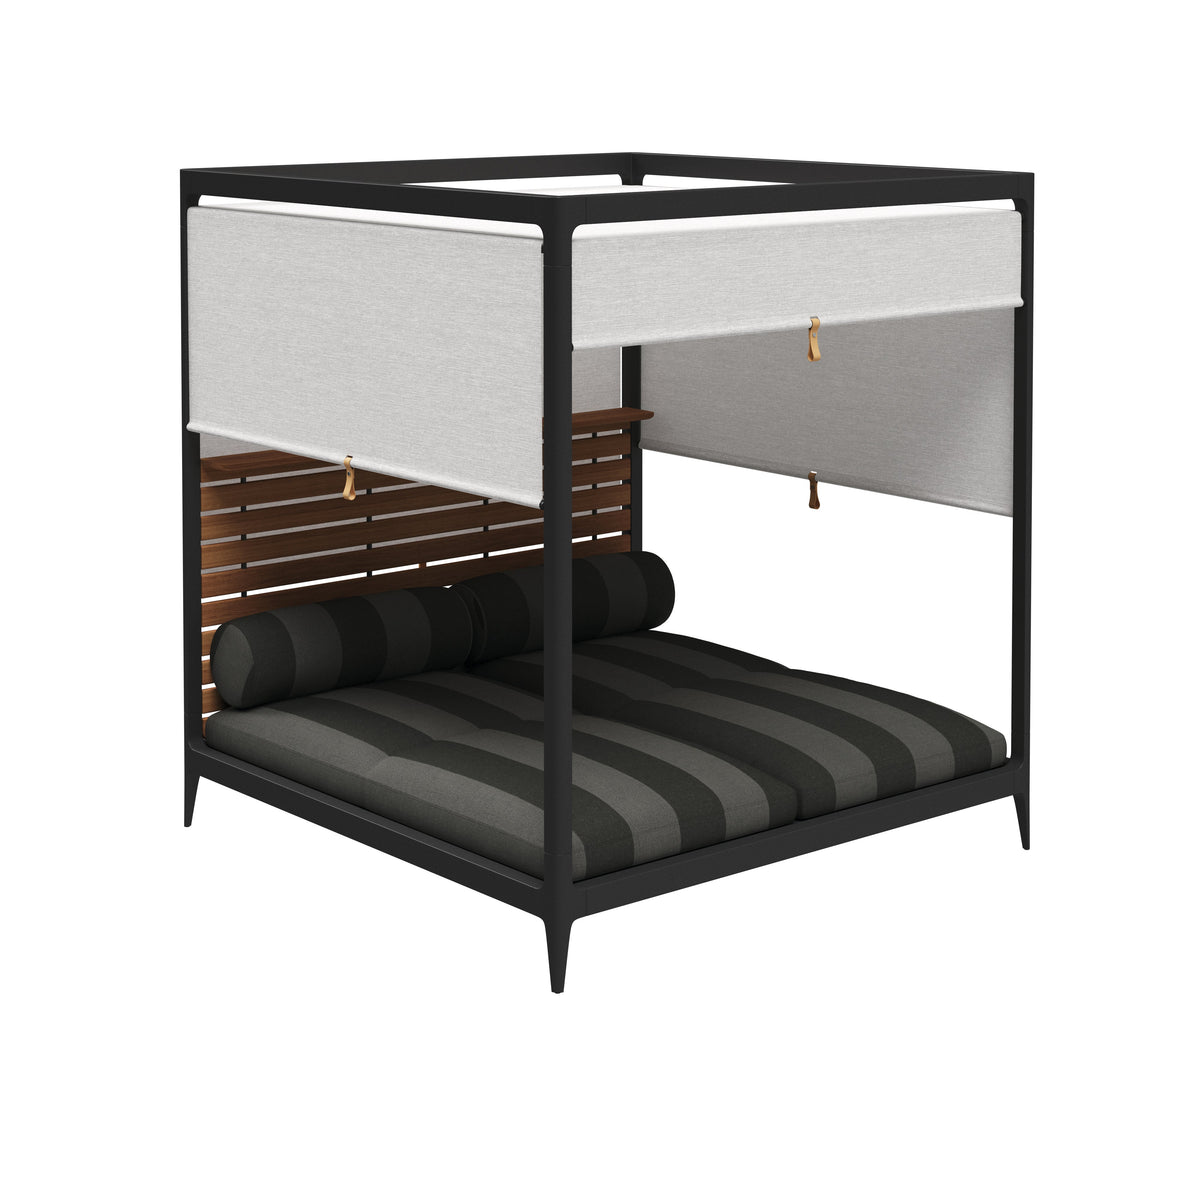 Grid Cabana Daybed-Gloster-Contract Furniture Store